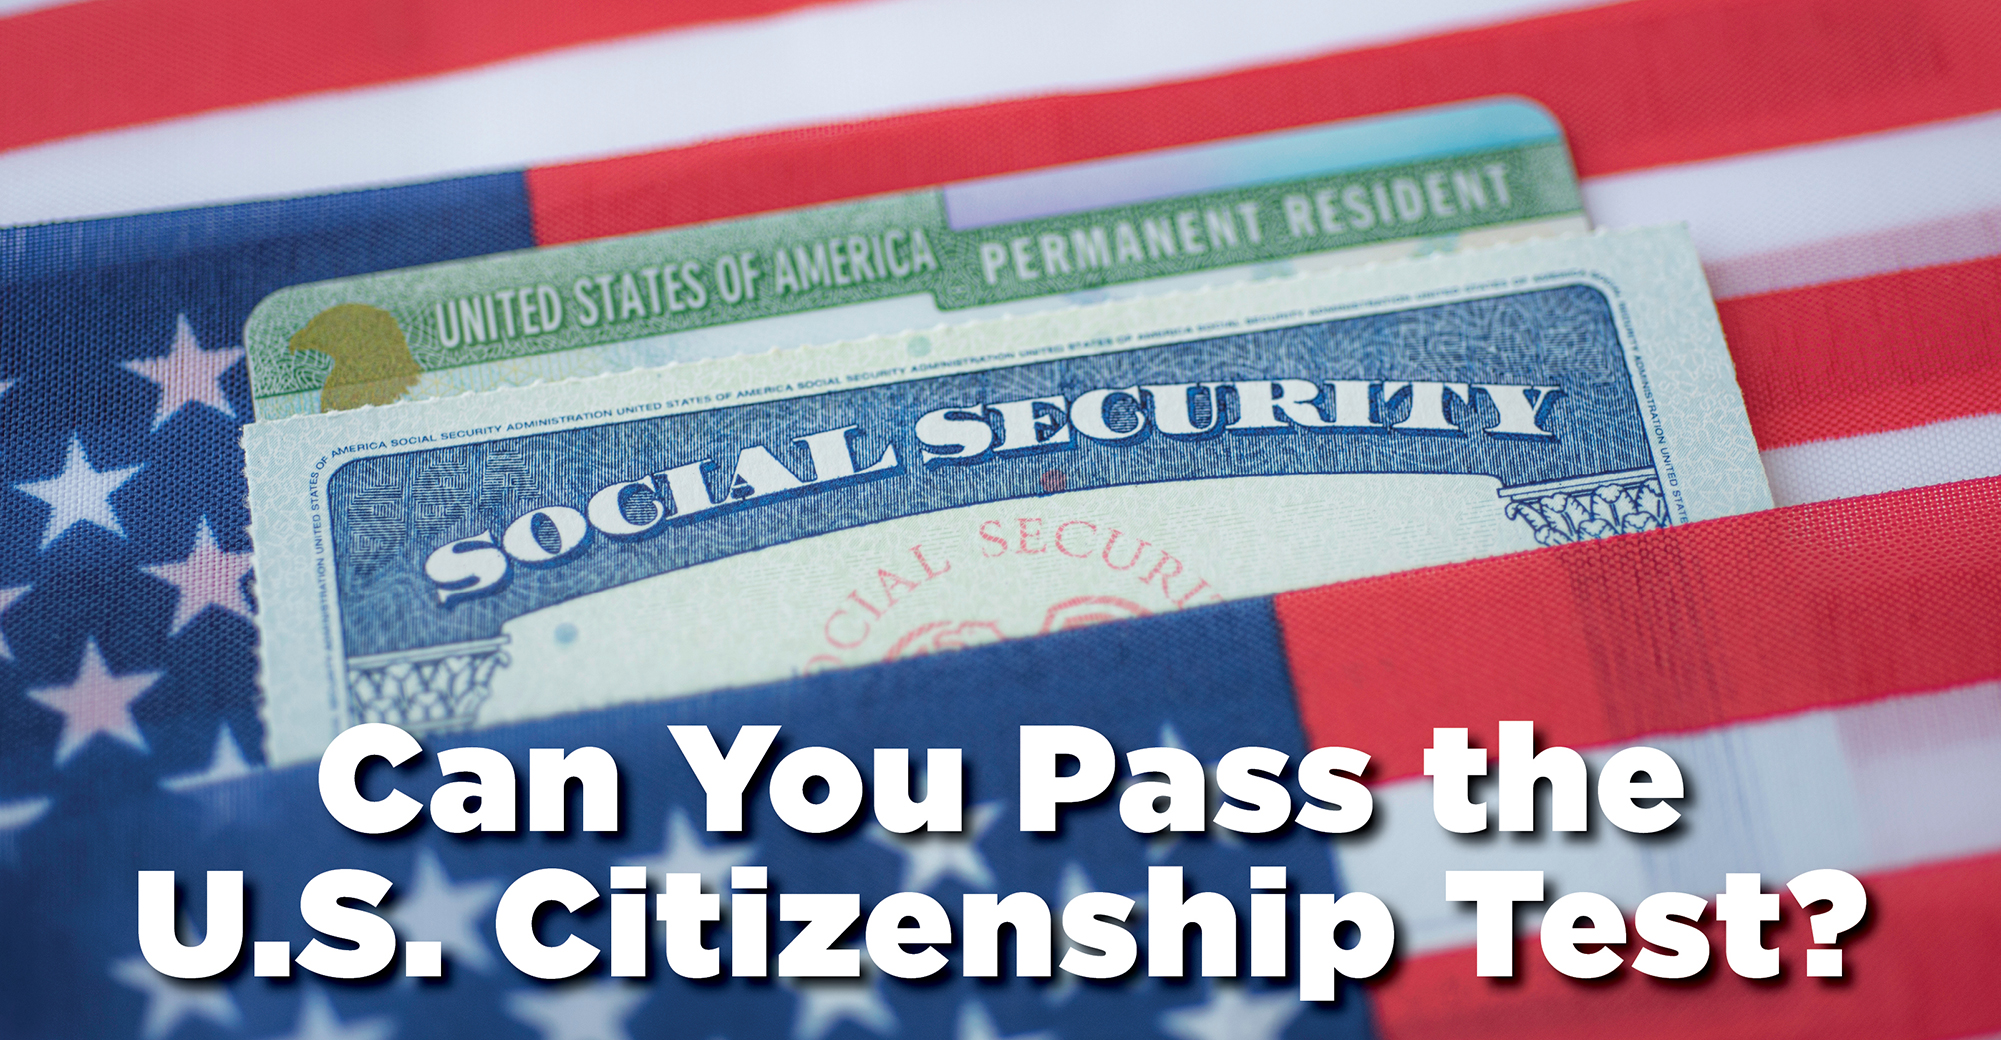 Can You Pass the U.S. Citizenship Test? Wealth Management